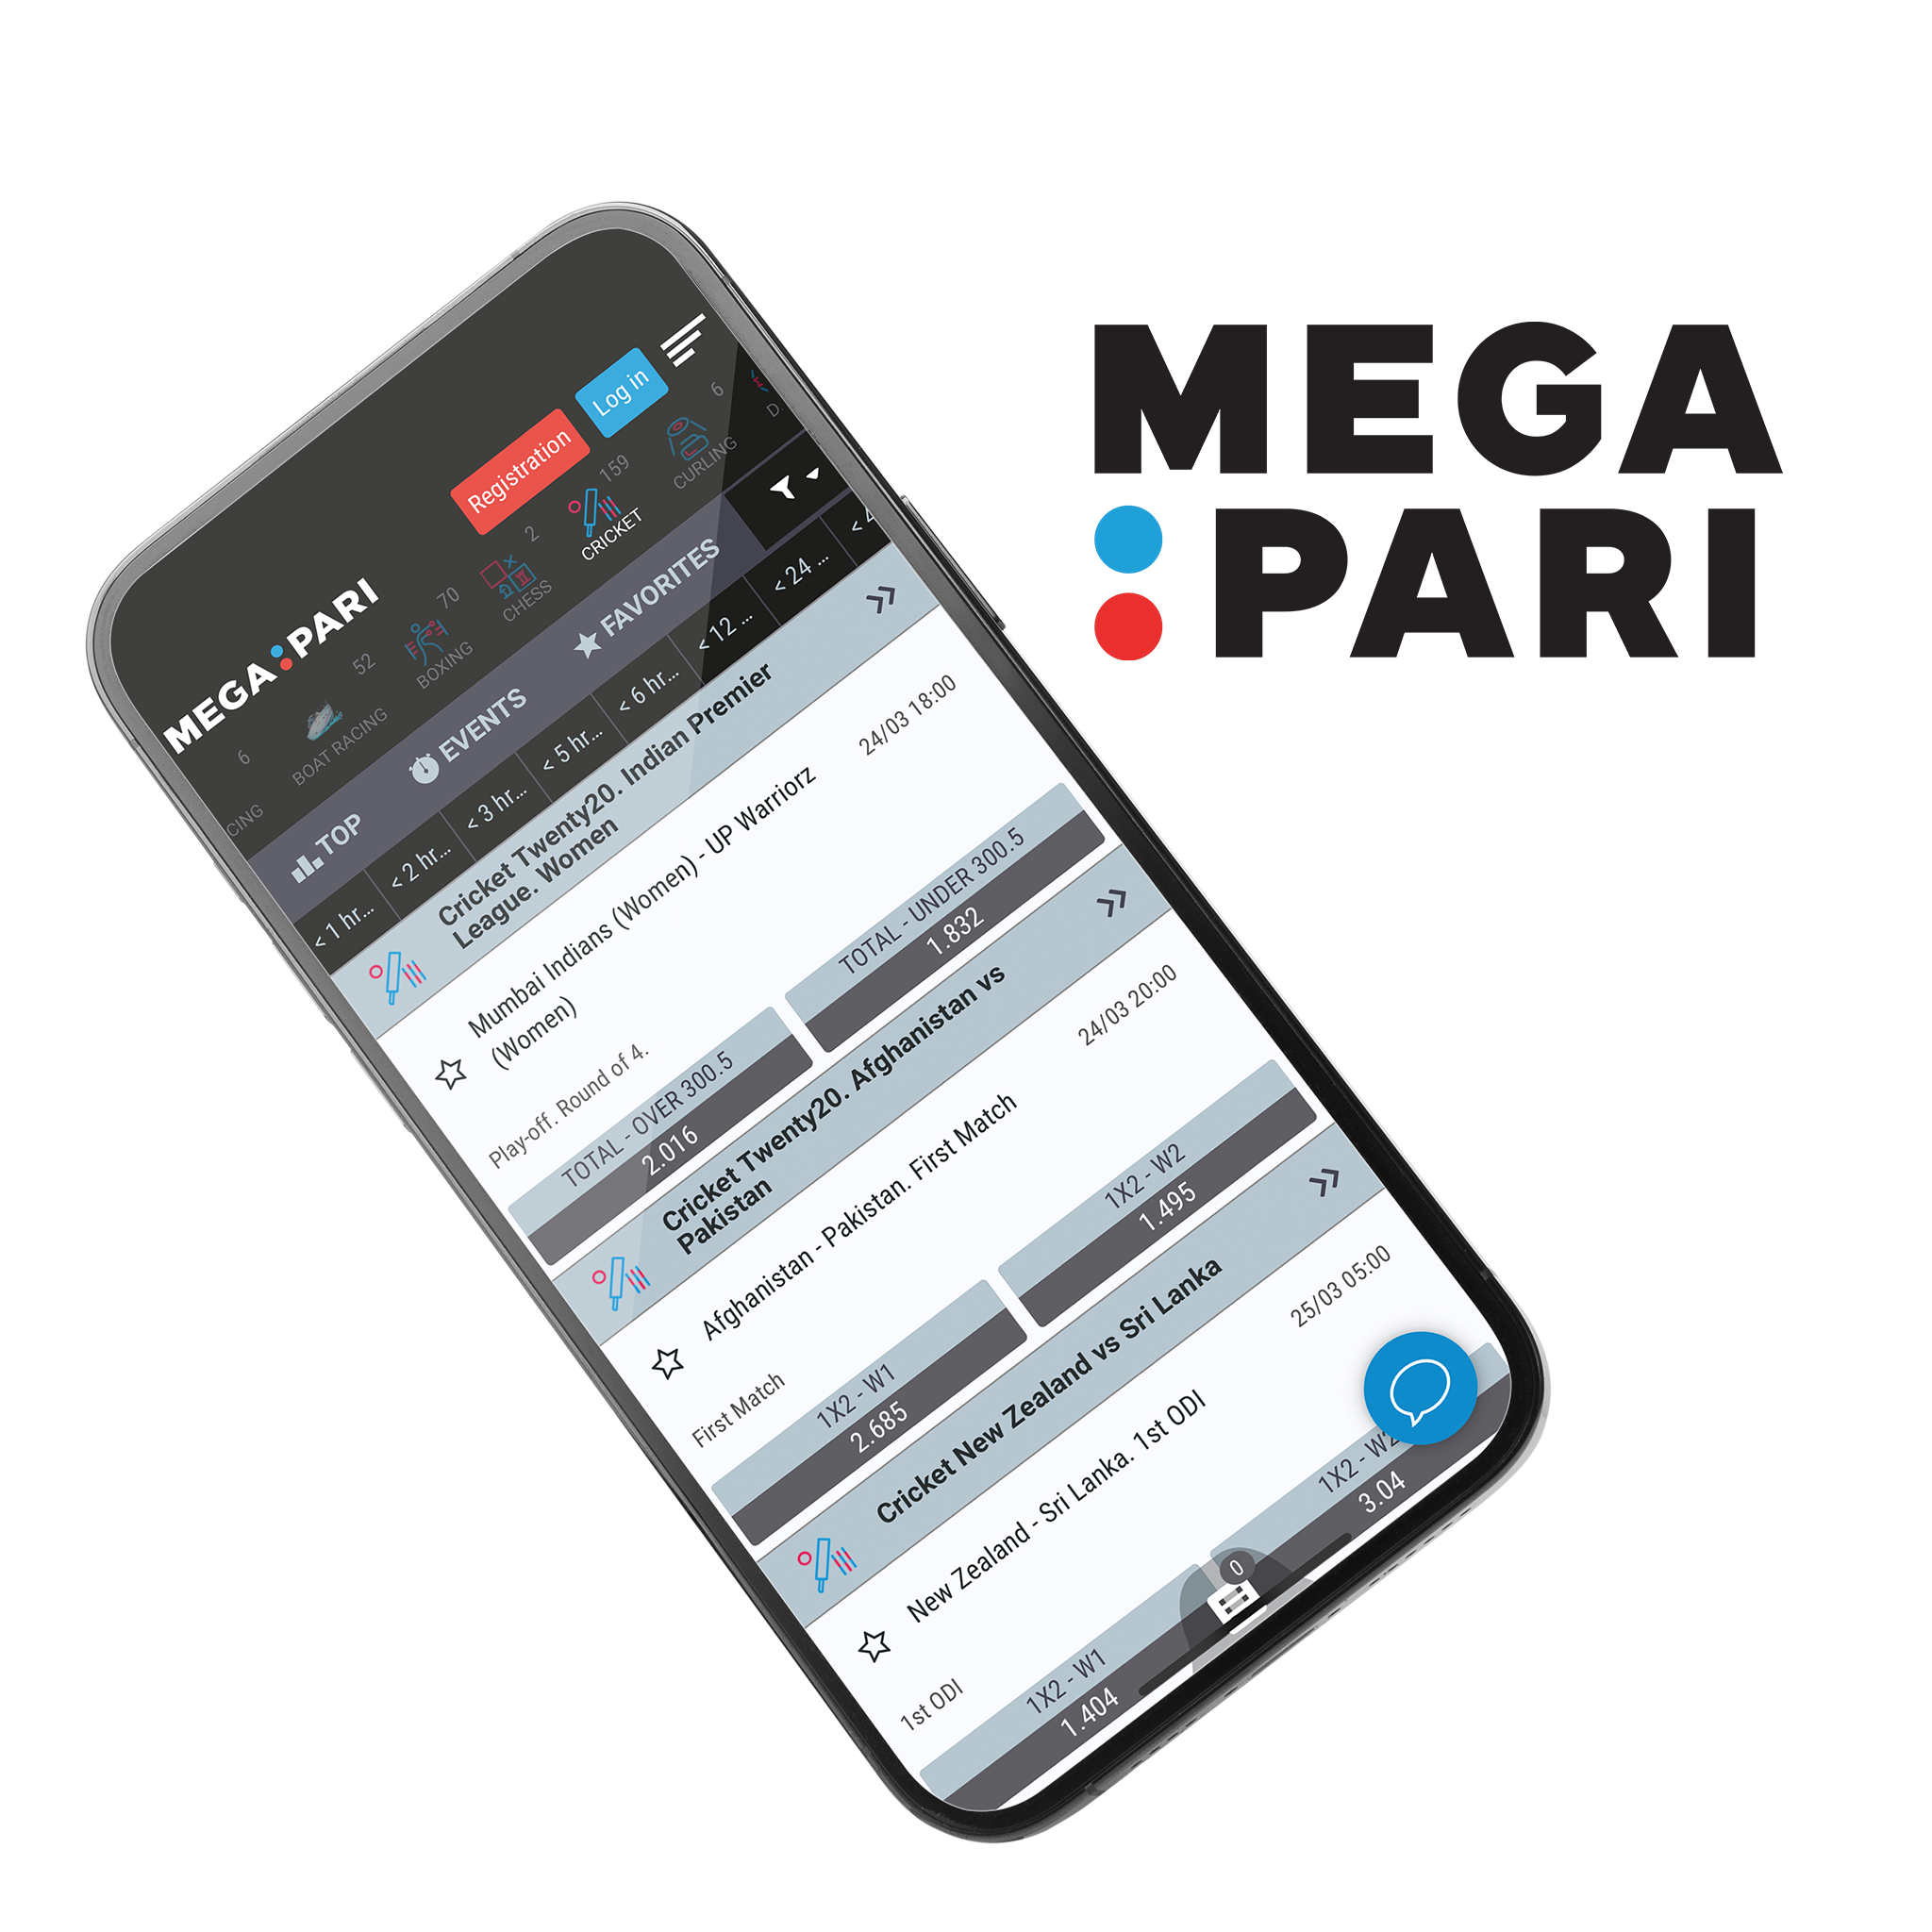 Online cricket betting are avaliable for Megapari app users.